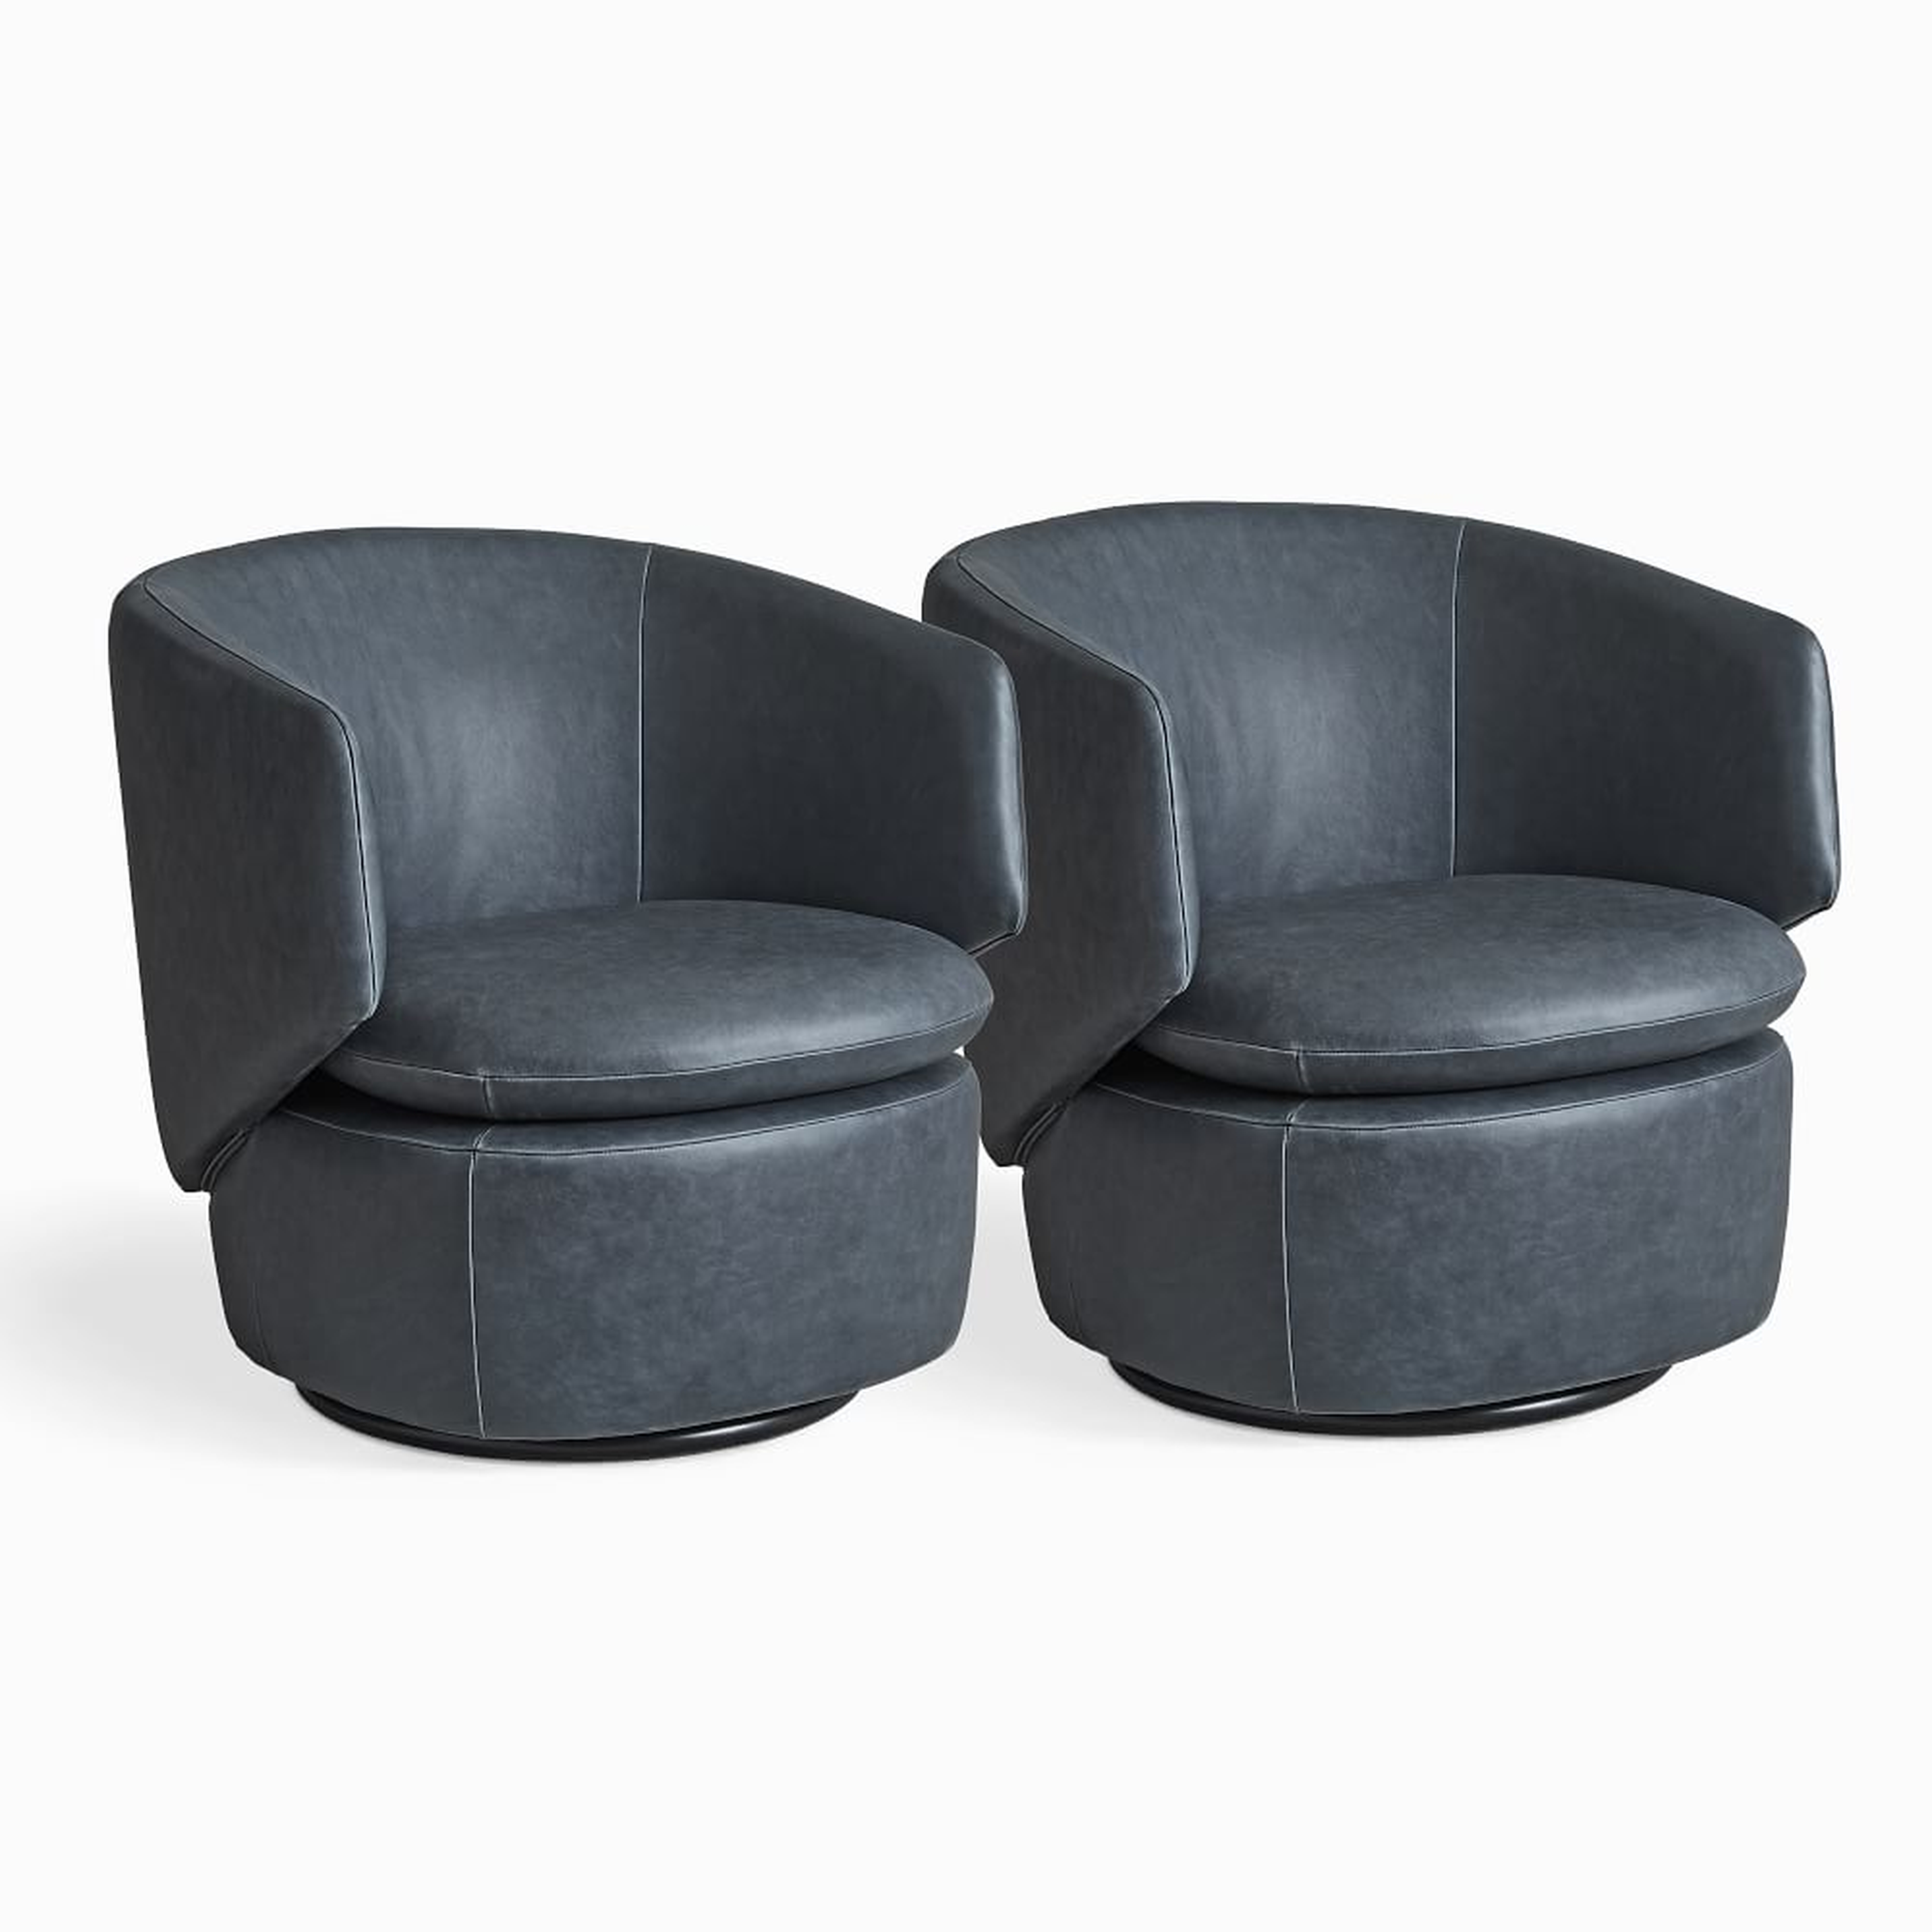 Crescent Leather Swivel Chair, Ludlow Leather, Navy, Set of 2 - West Elm